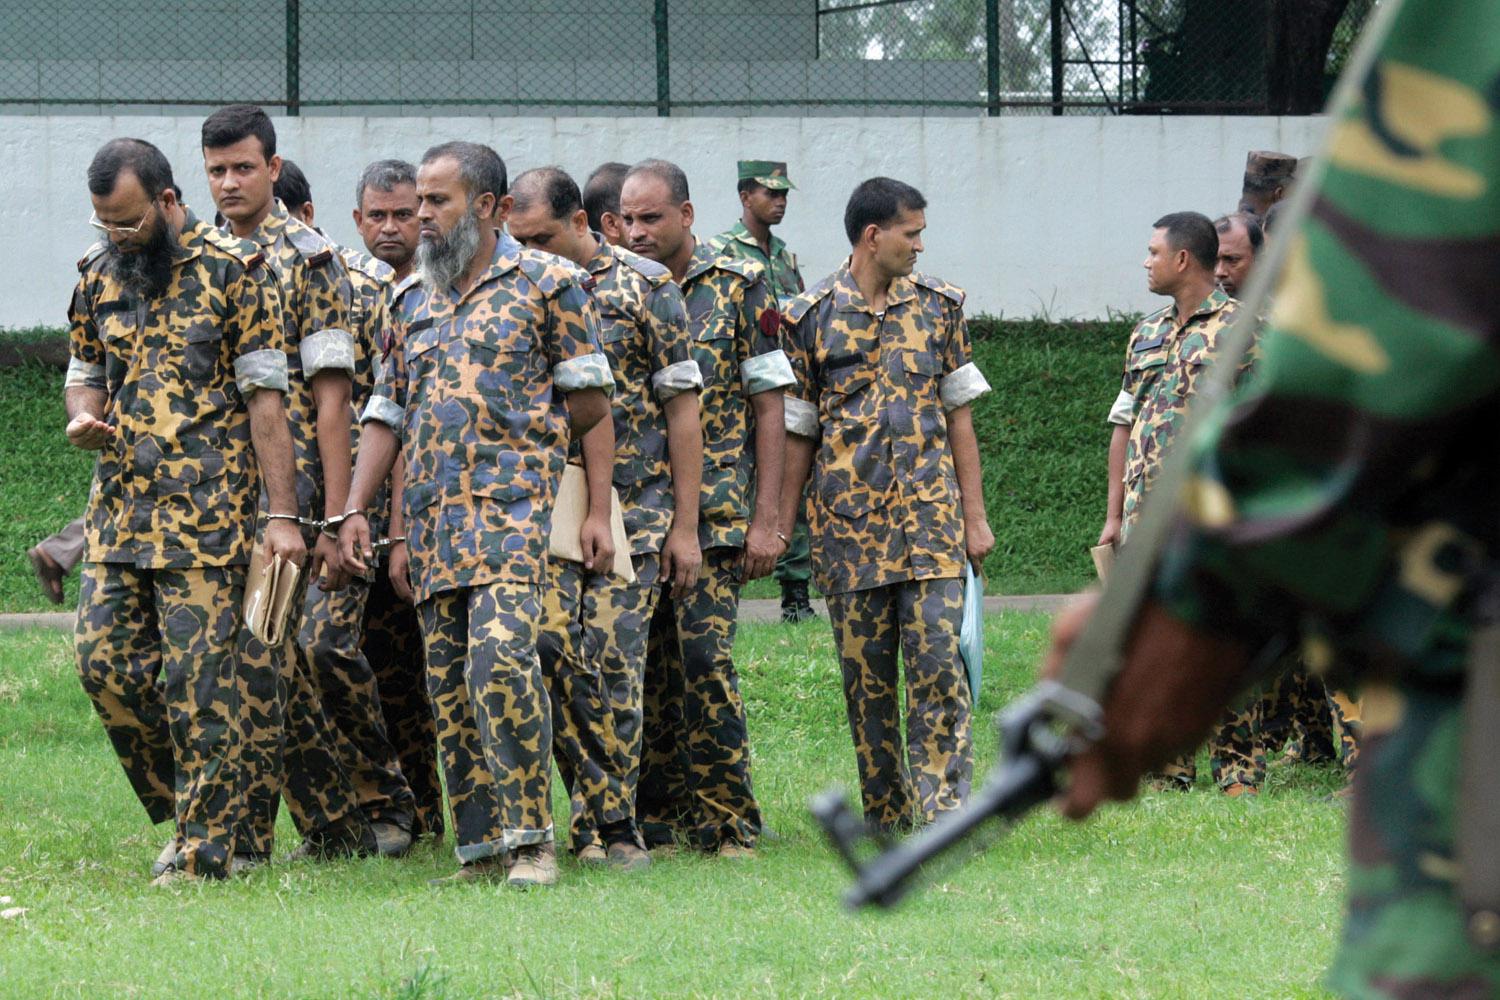 Members of Bangladesh Rifles (BDR) accused of mutiny are summoned for a hearing before a special court in Dhaka July 12, 2010.